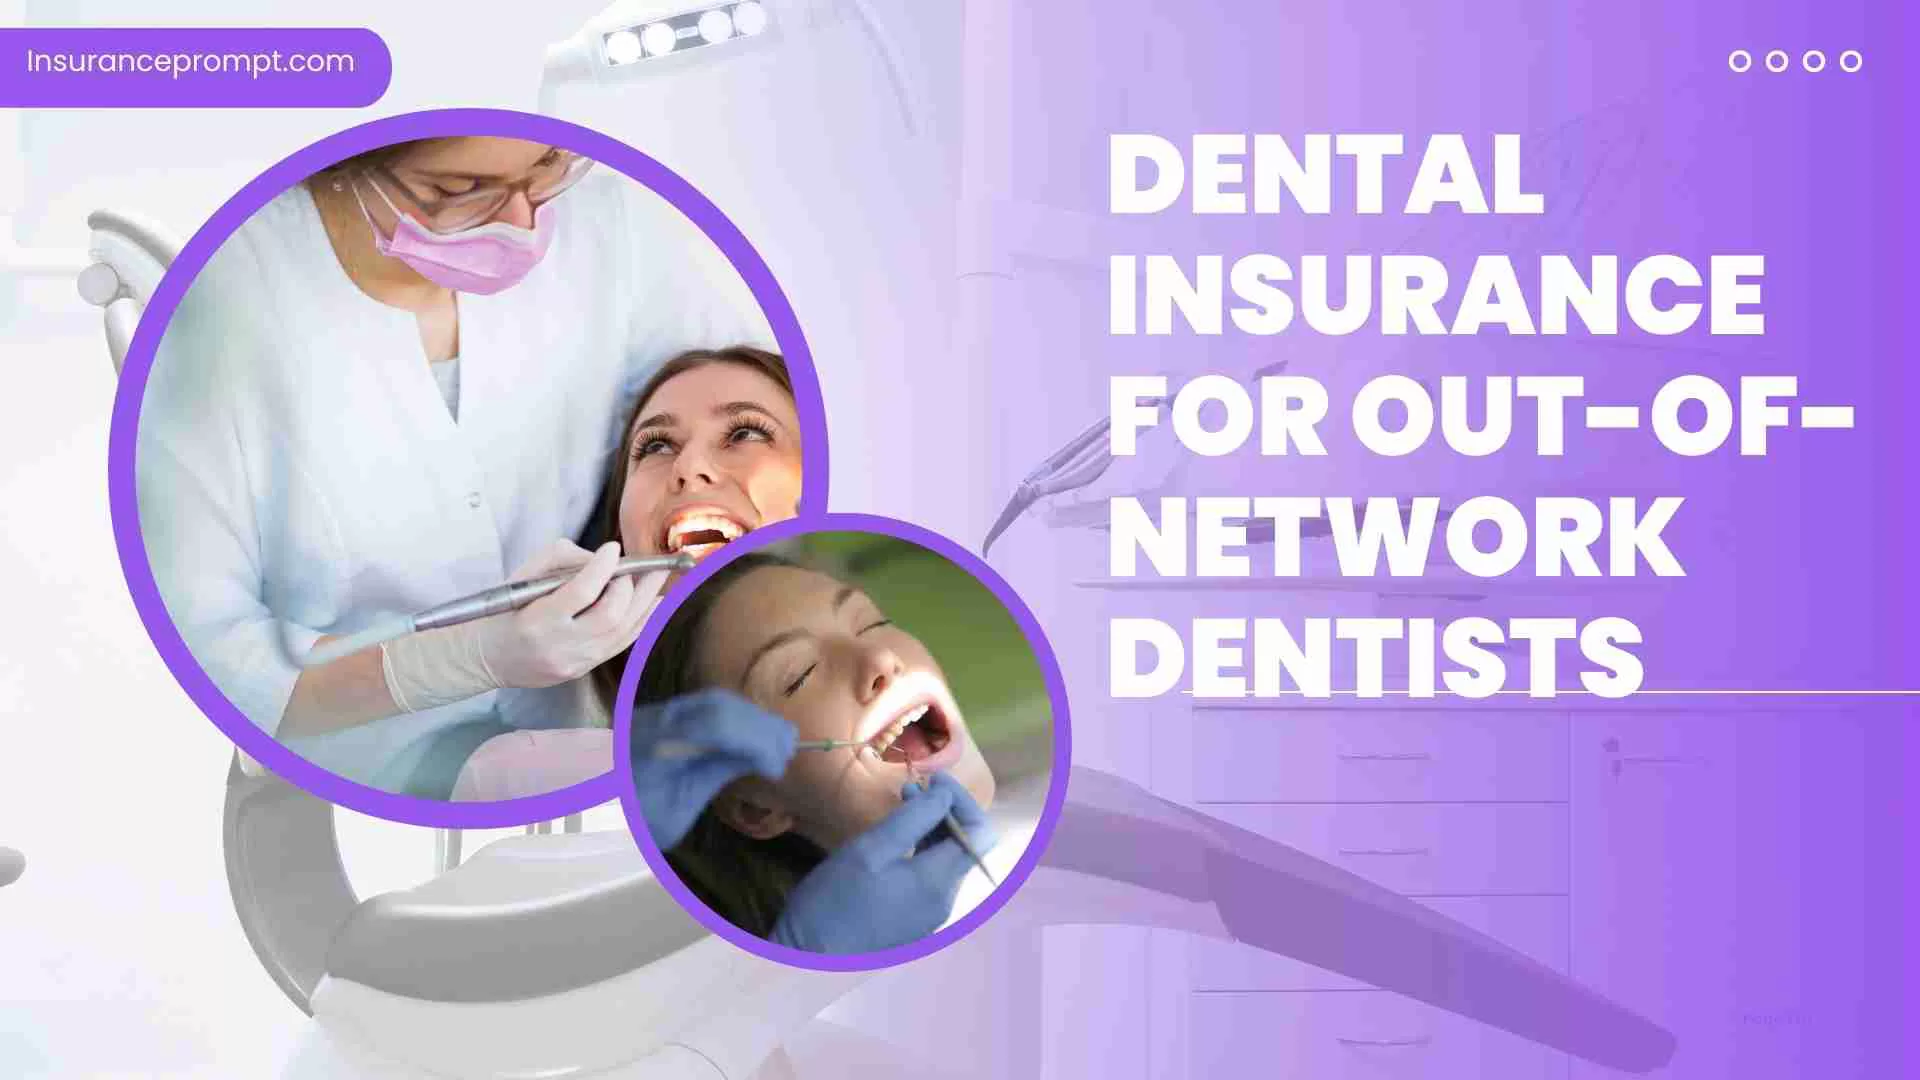 Dental Insurance For Out-of-Network Dentists